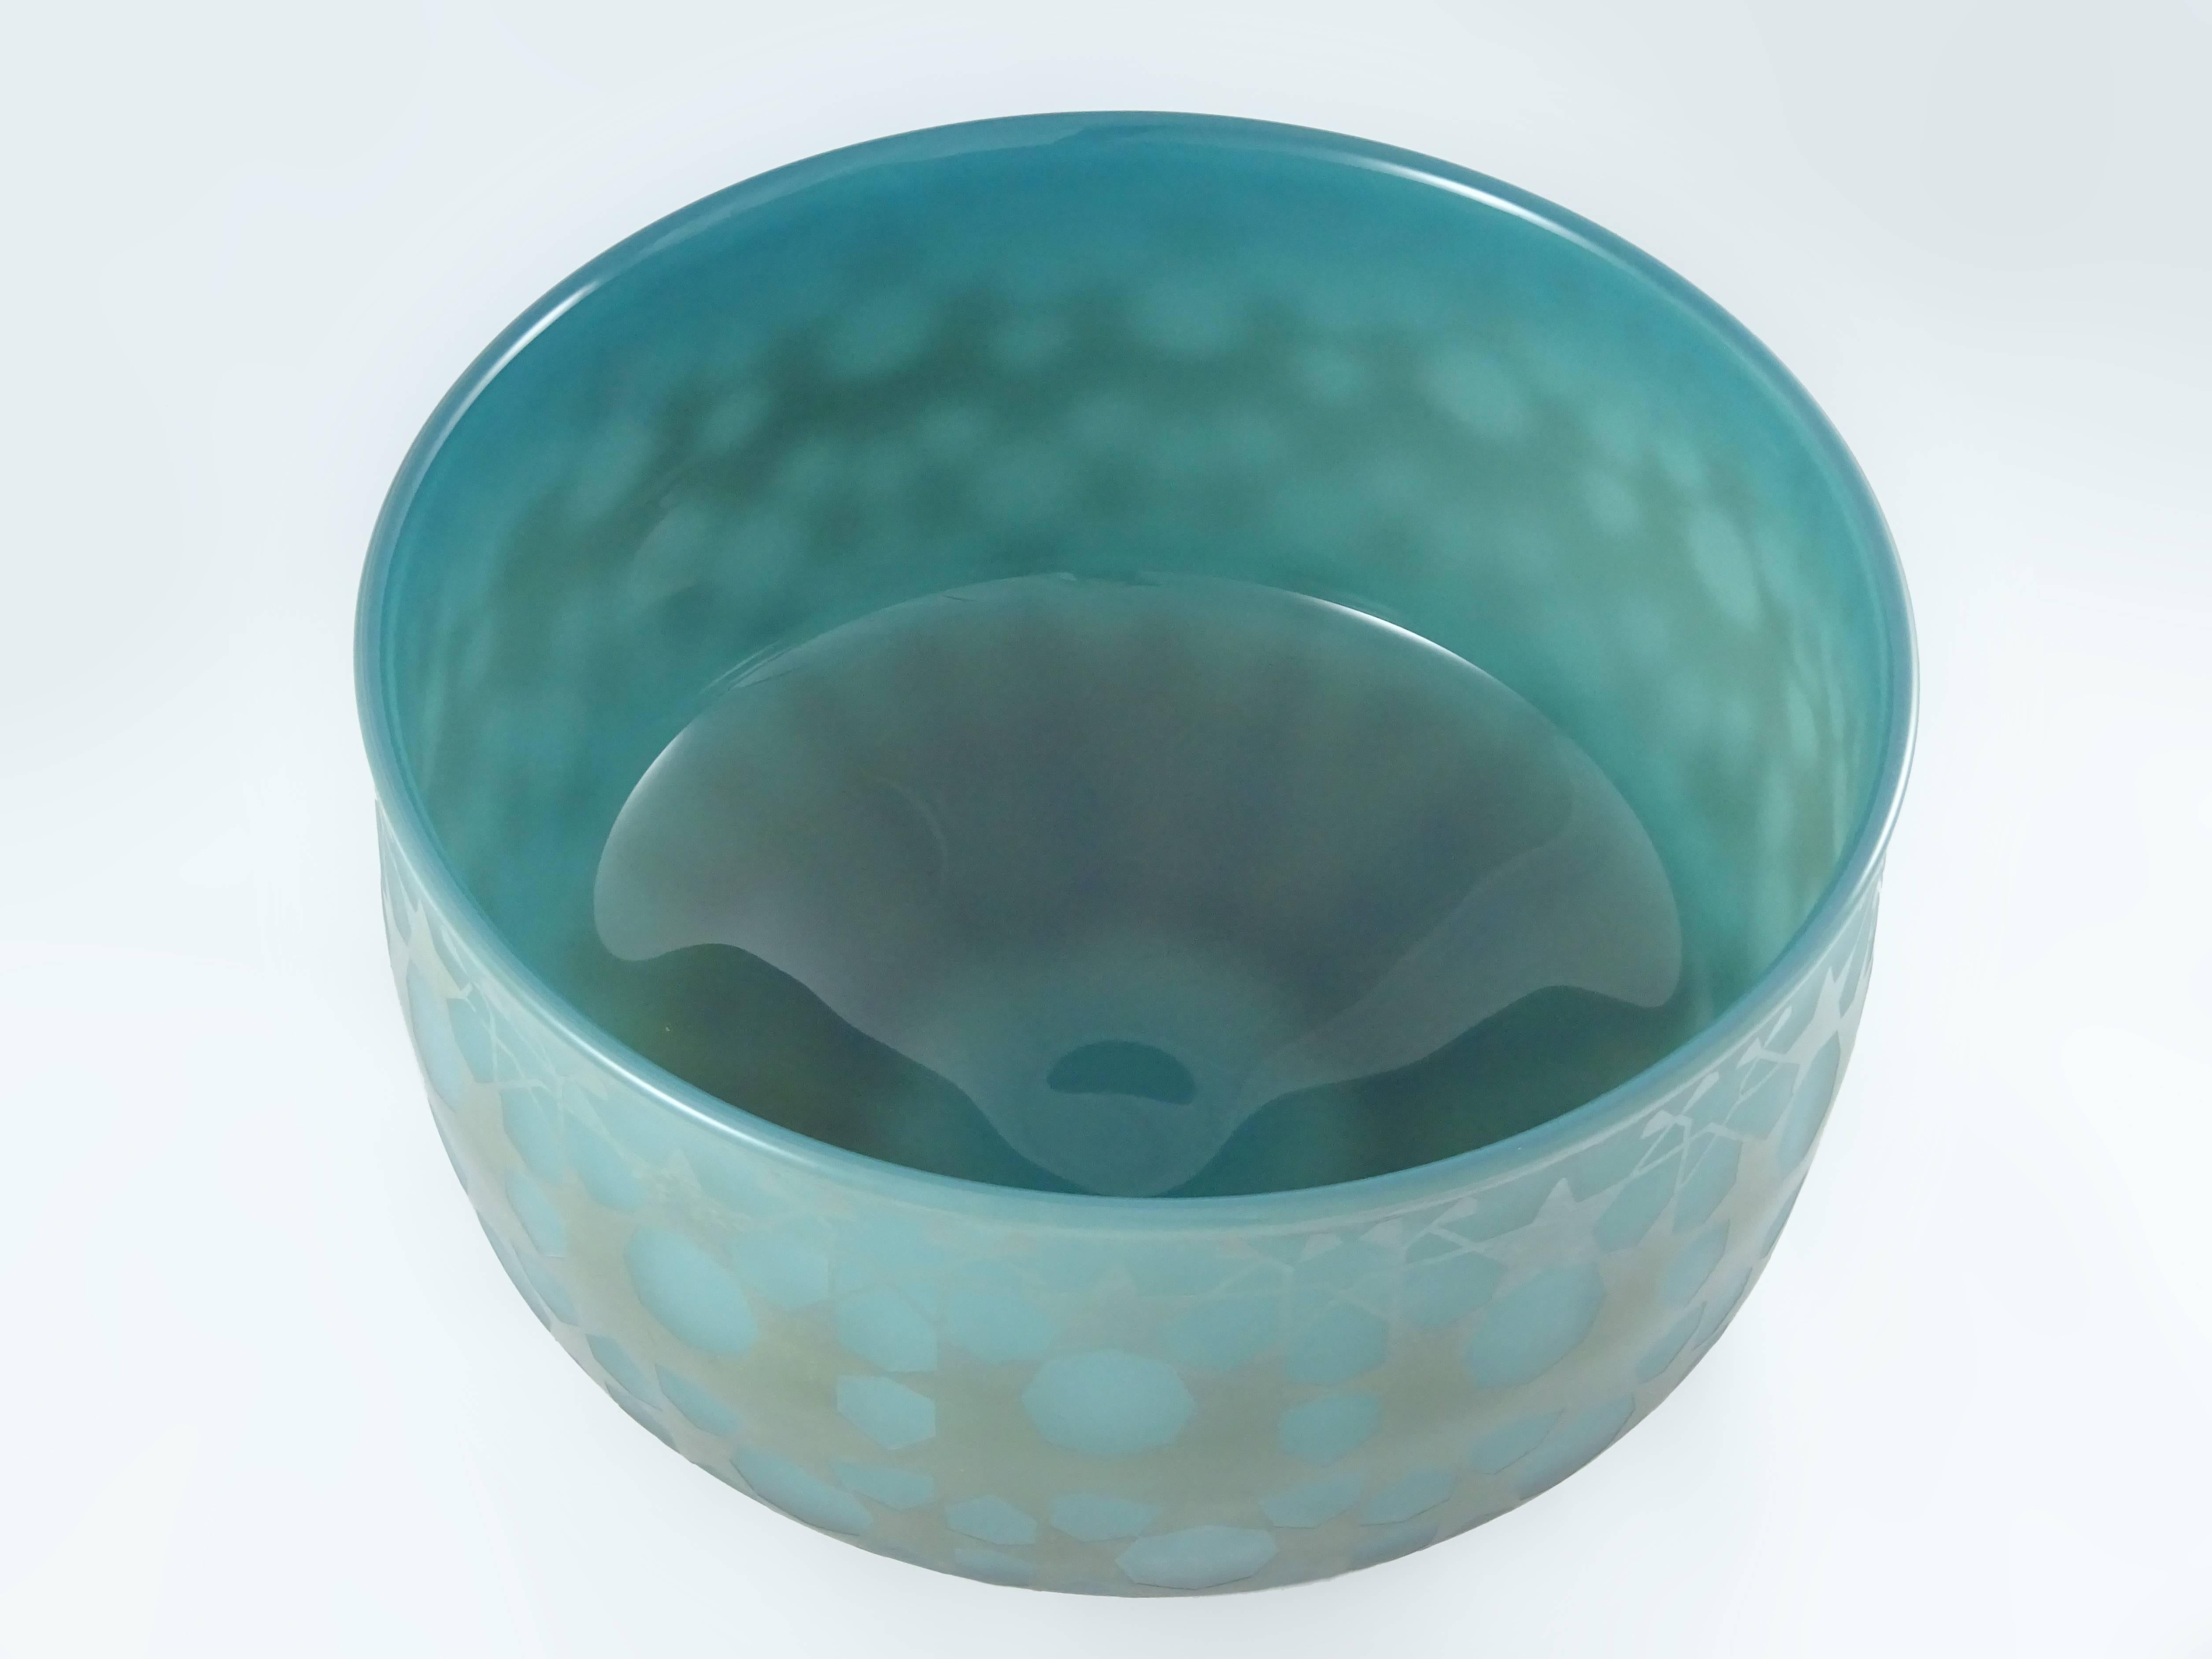 Blown glass bowl or vessel shaped sculpture. Ocean green semi translucent glass with a matte sandblasted glass decorations on the outside. During the final stage of creating this wonderful glass sculpture, the decorative pattern was created by